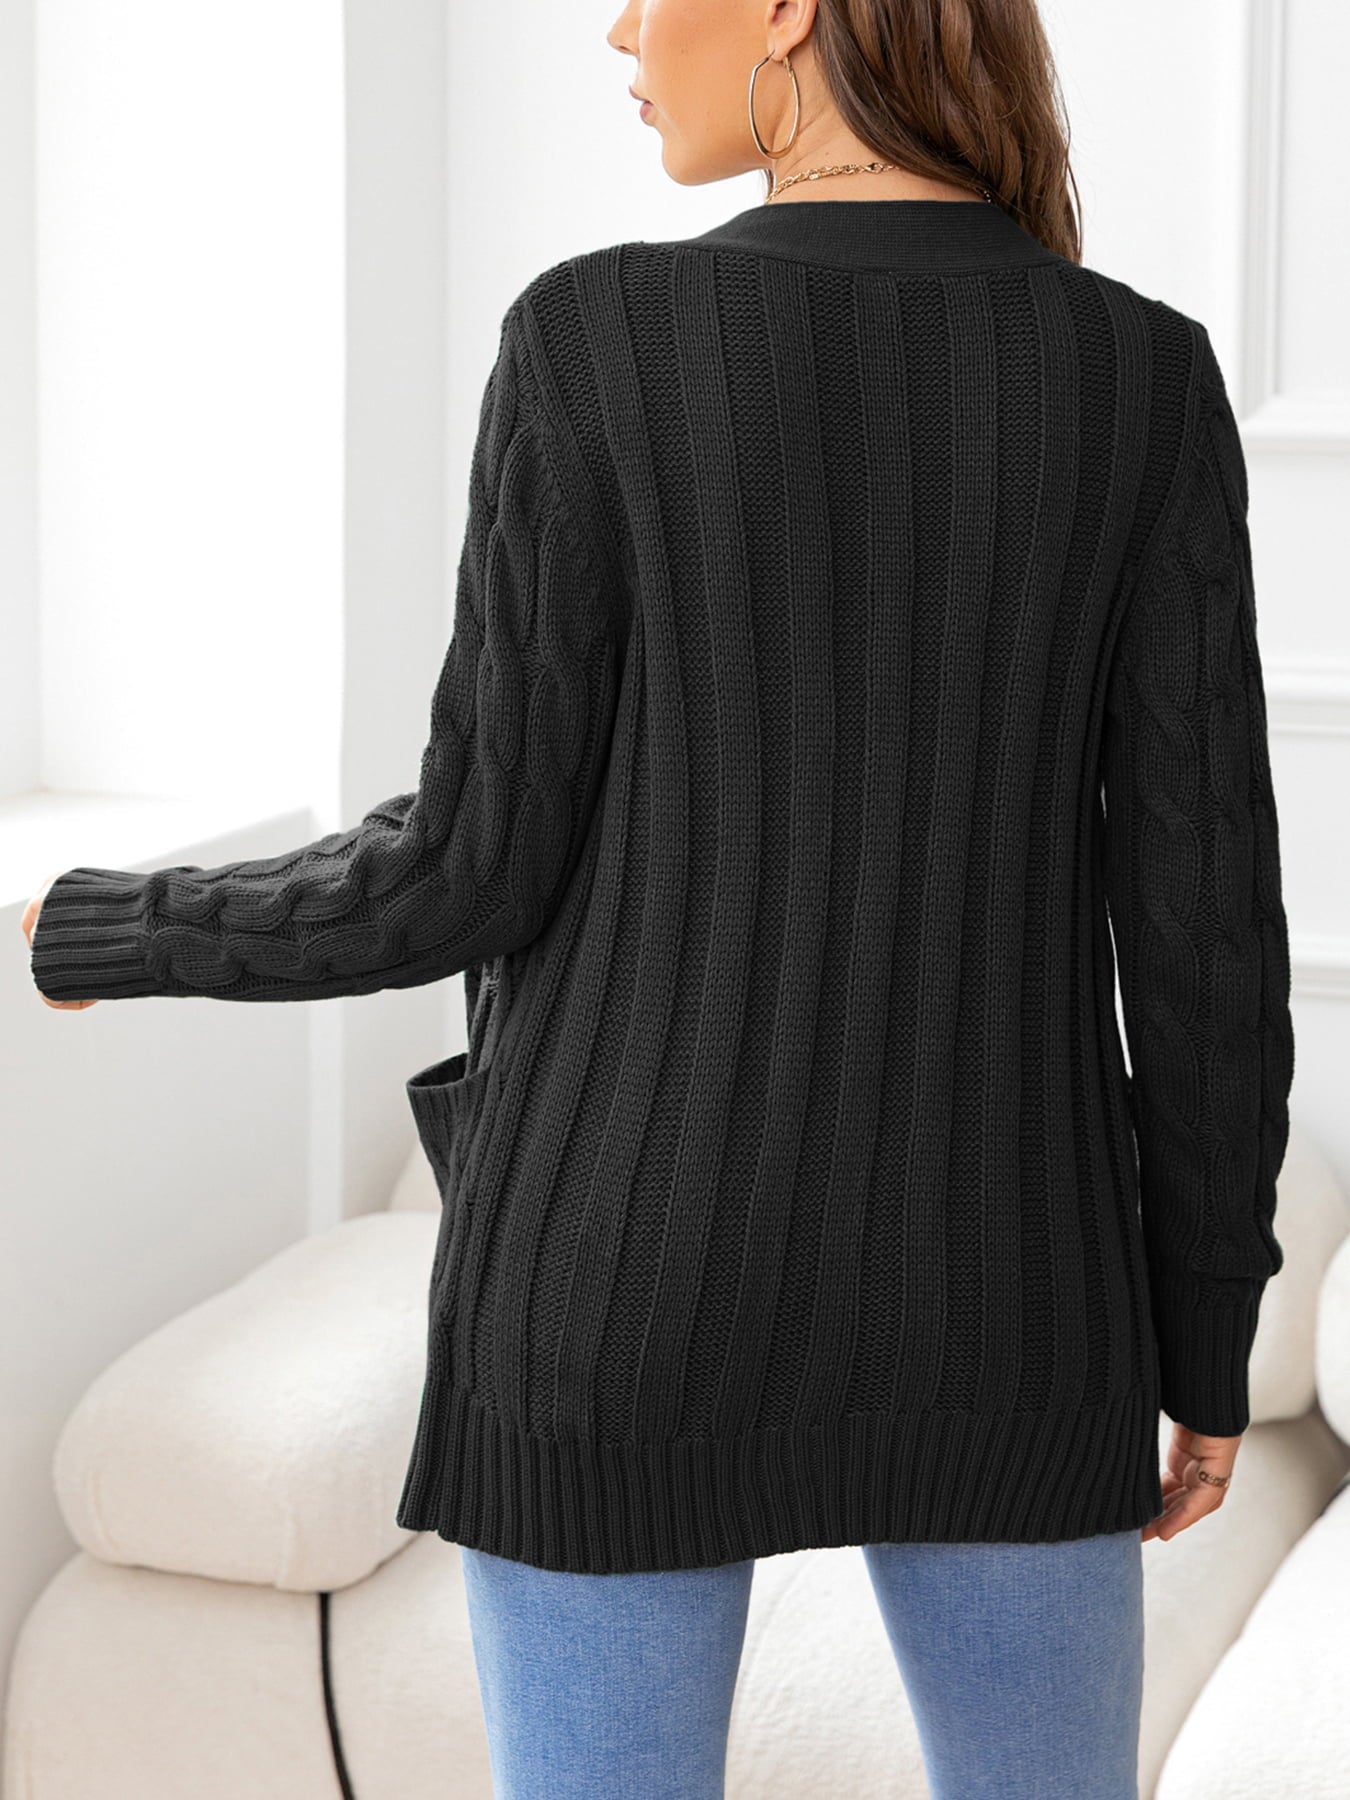 Button Down Cable-Knit Cardigan - Women’s Clothing & Accessories - Shirts & Tops - 15 - 2024